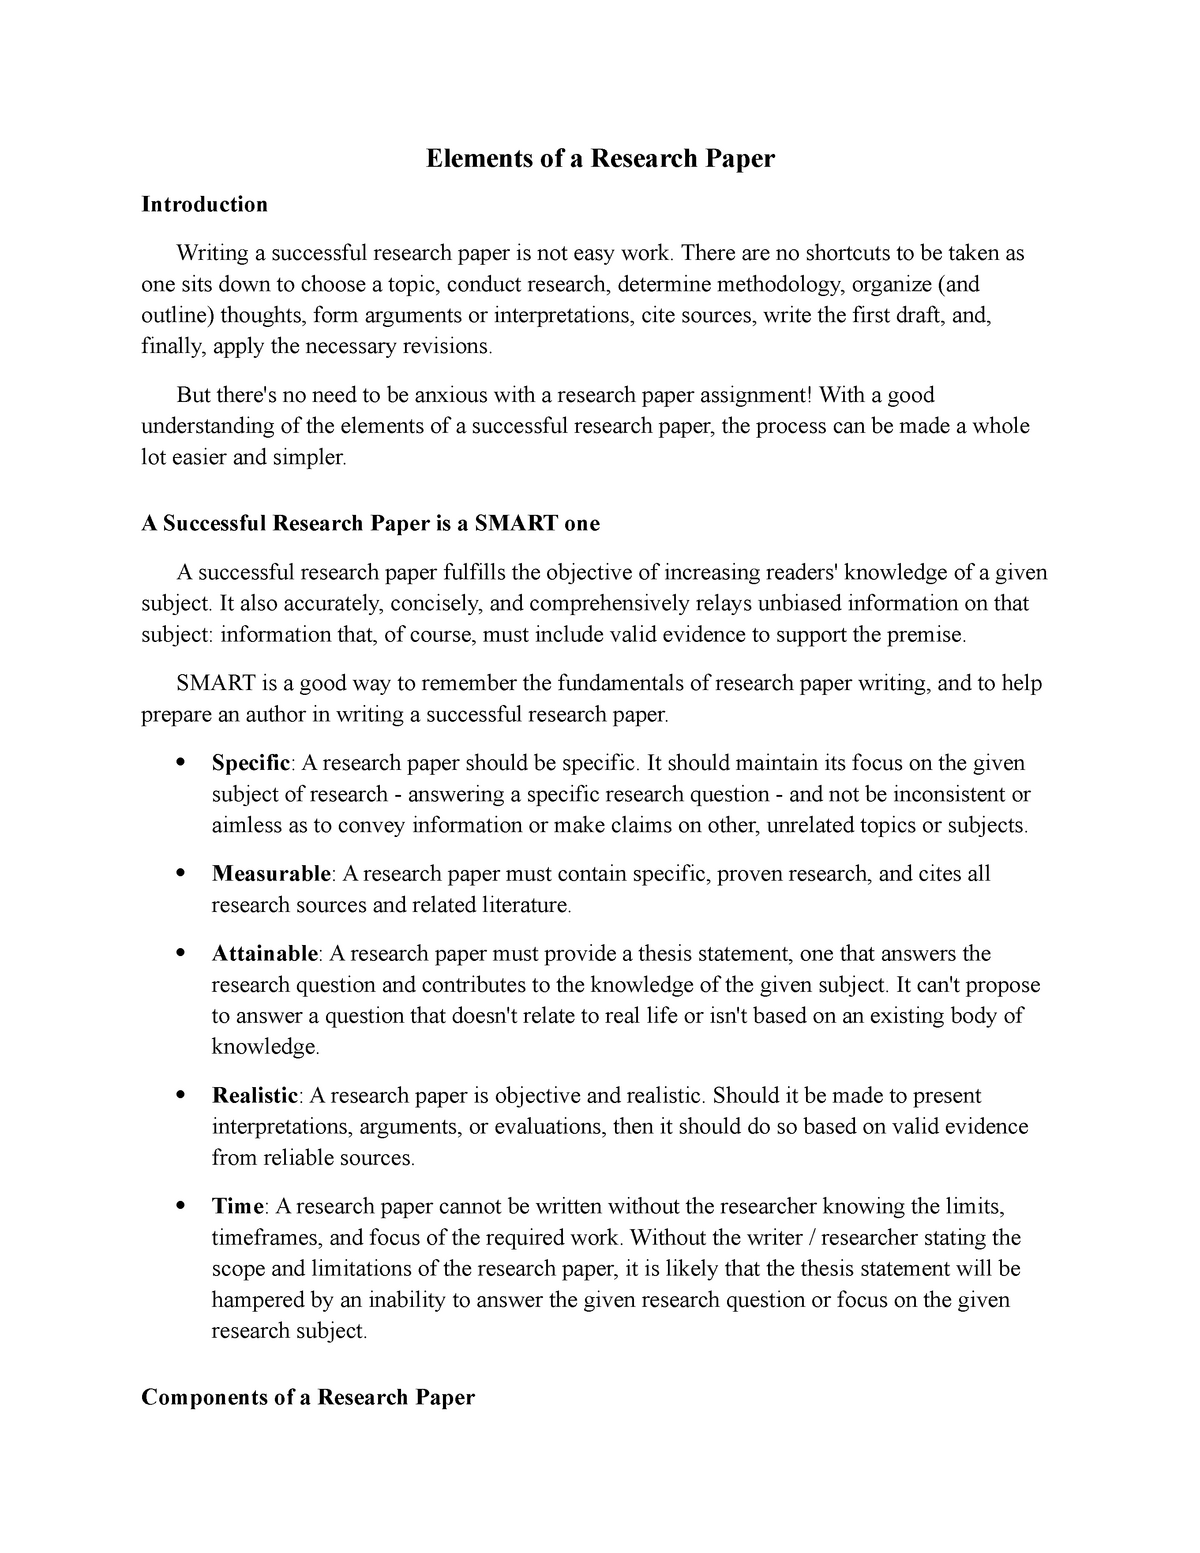 what are the elements of research proposal pdf